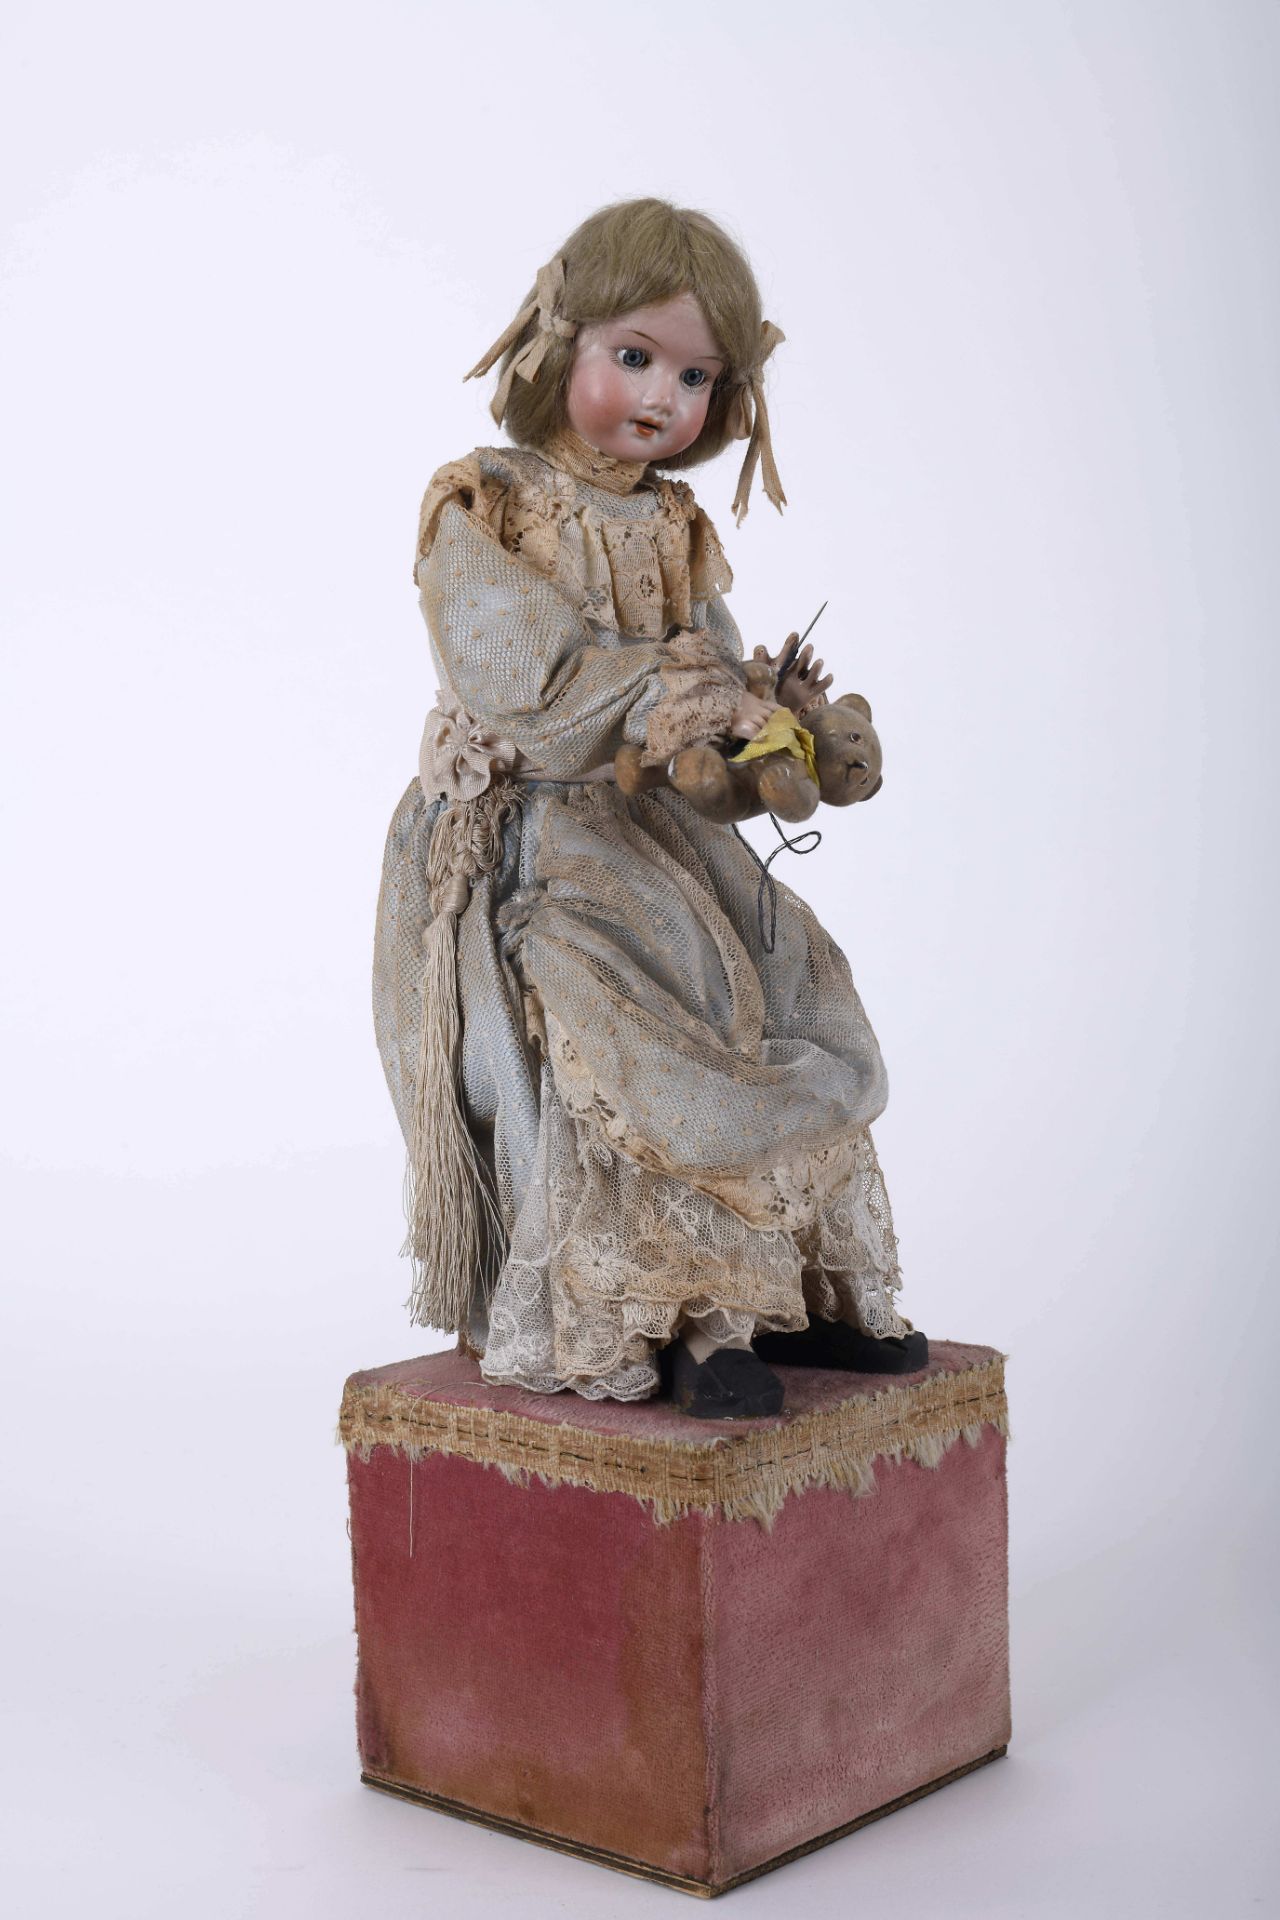 Automaton "Doll sewing a teaddy bear" - Image 2 of 2